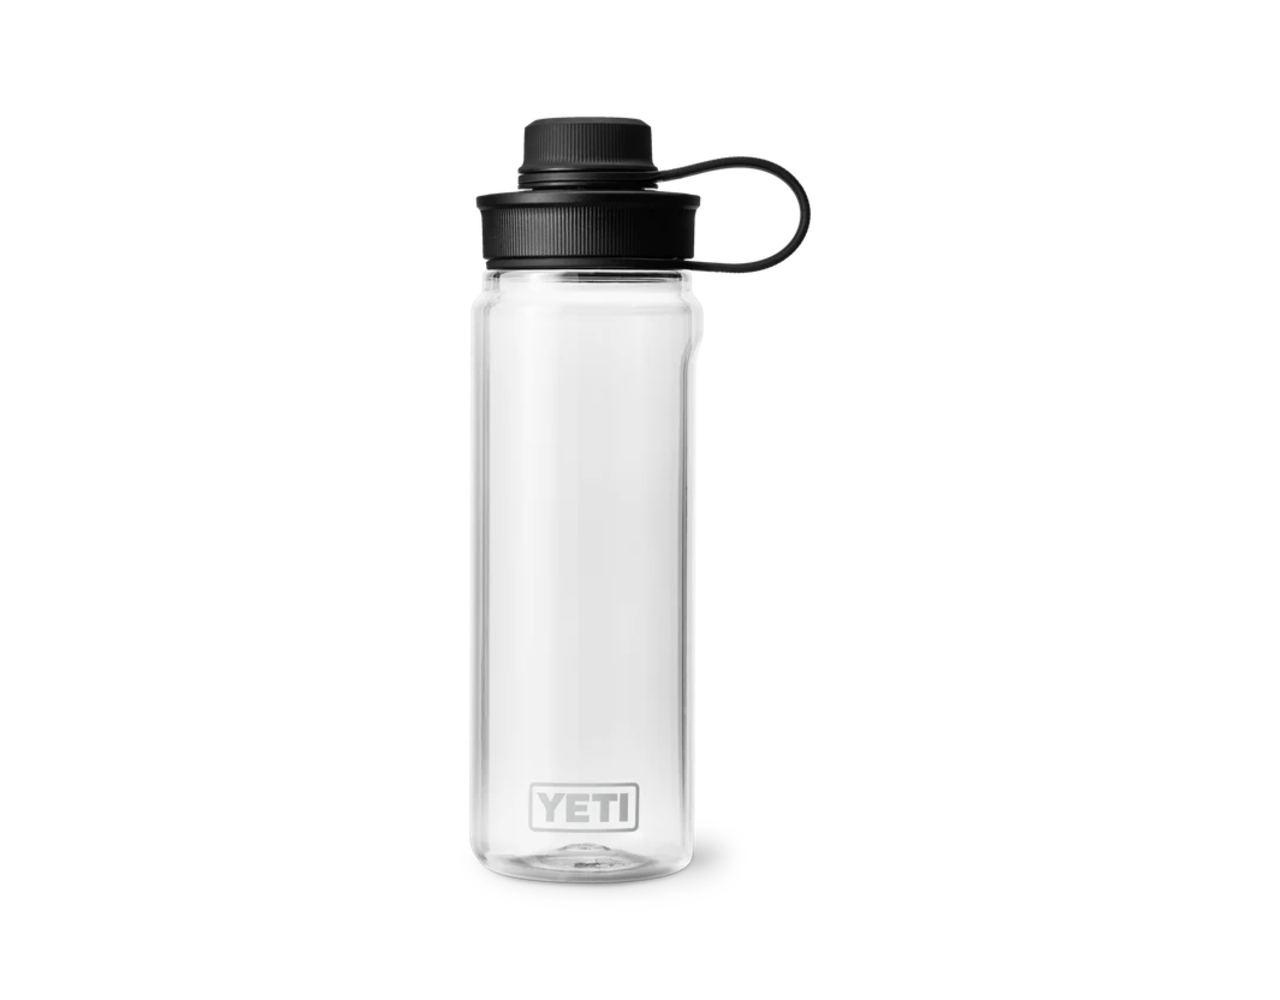 Yeti Promotional Yonder 25oz Water Bottle Clear 21071220003F from